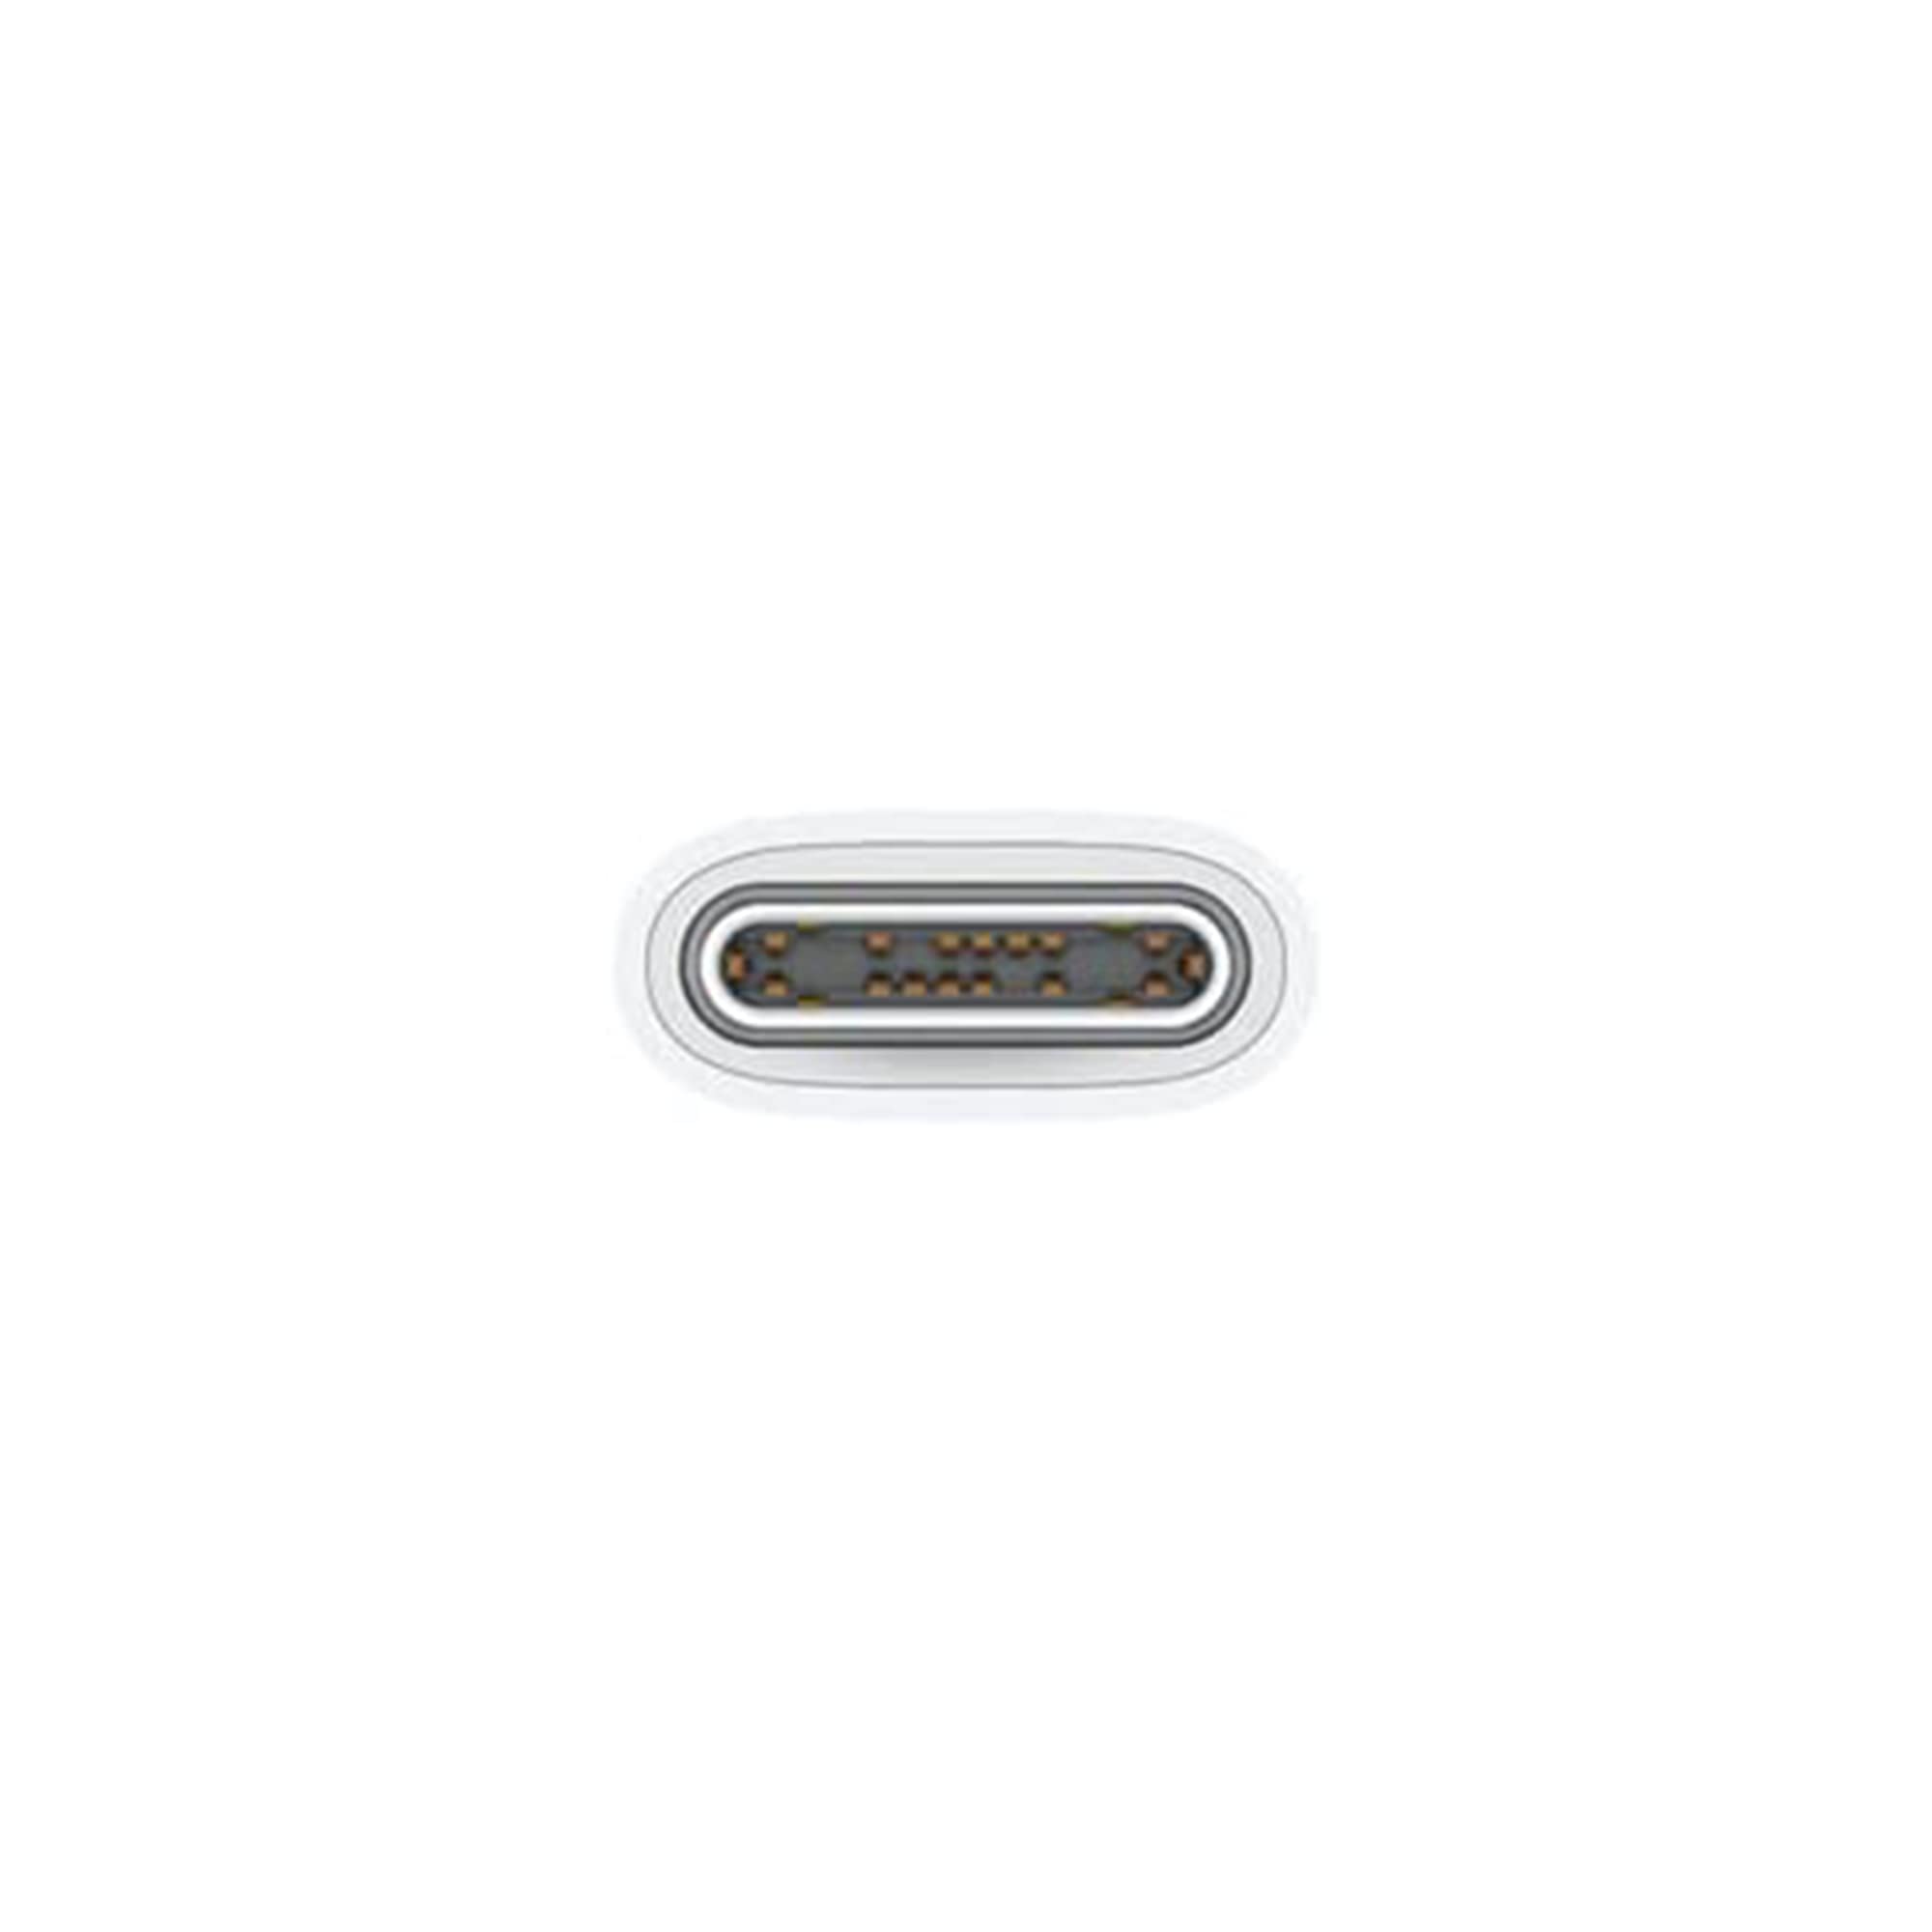 Apple USB-C Woven Charge Cable (1m)